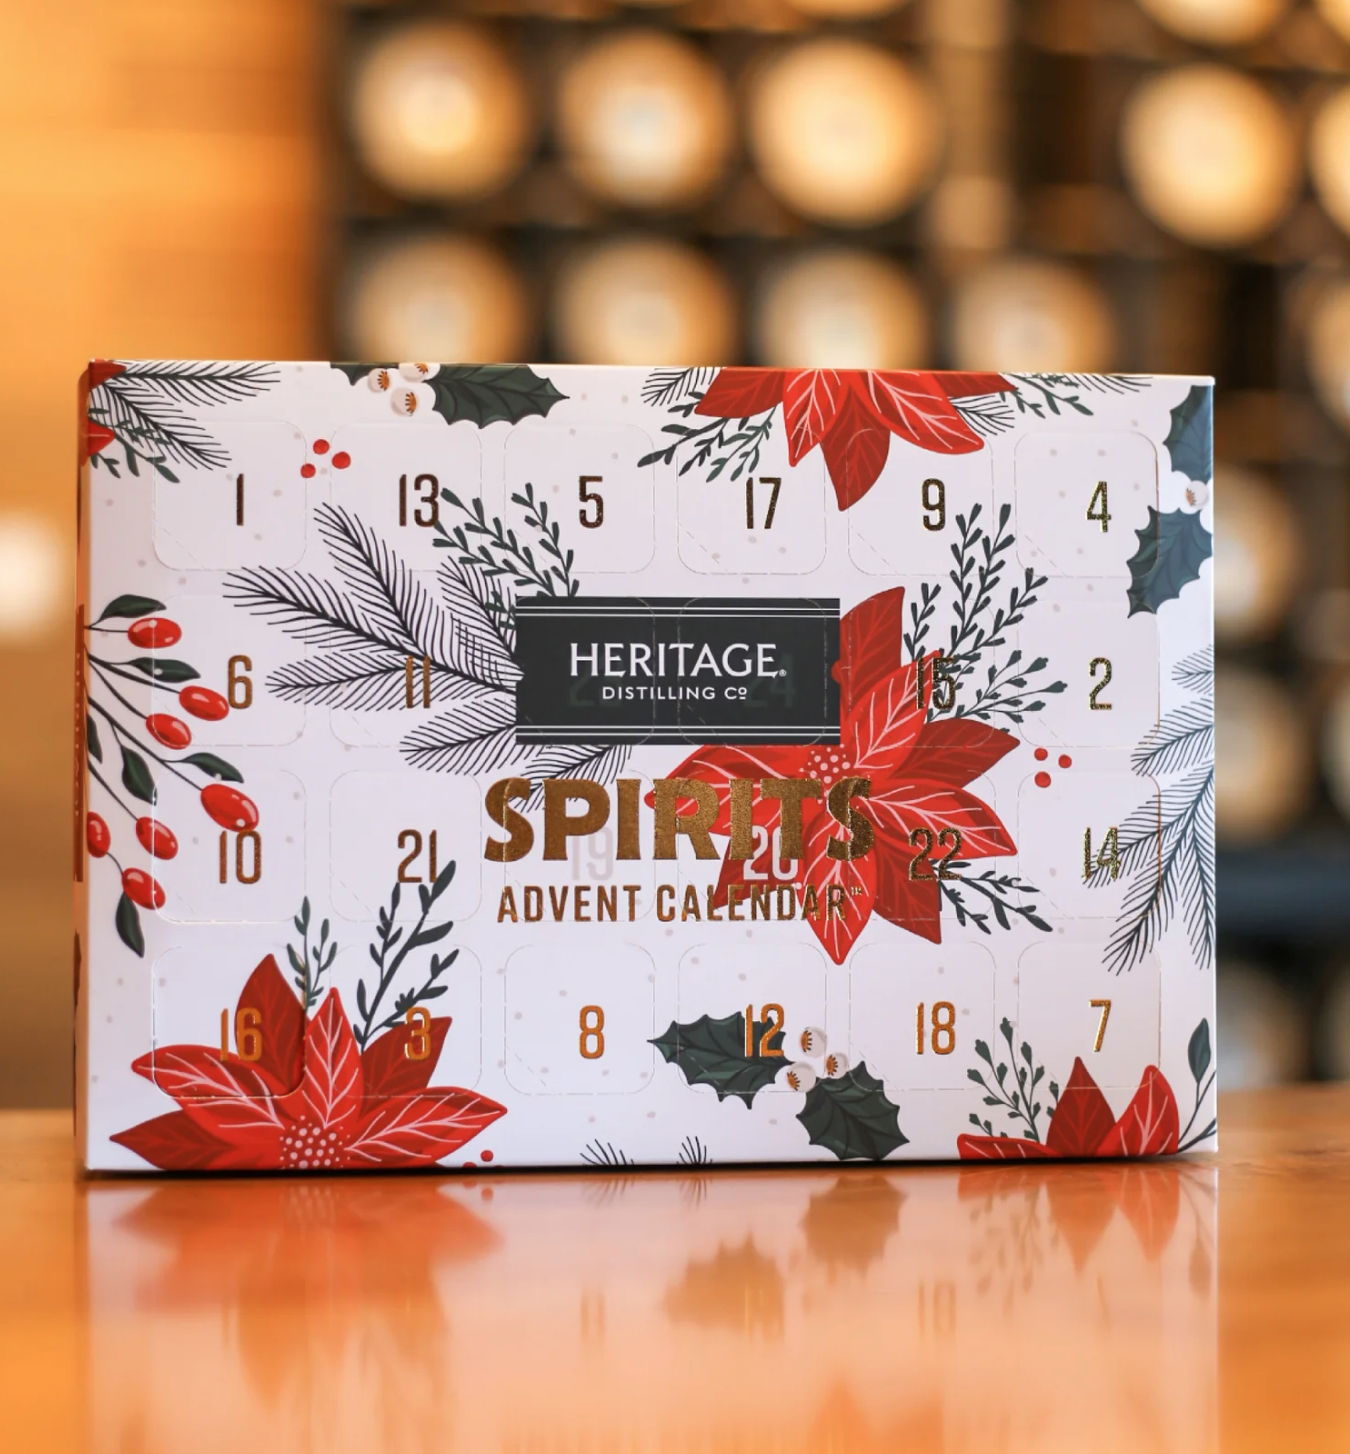 Heritage Distilling Co. Spirits Advent Calendar Reviews Get All The